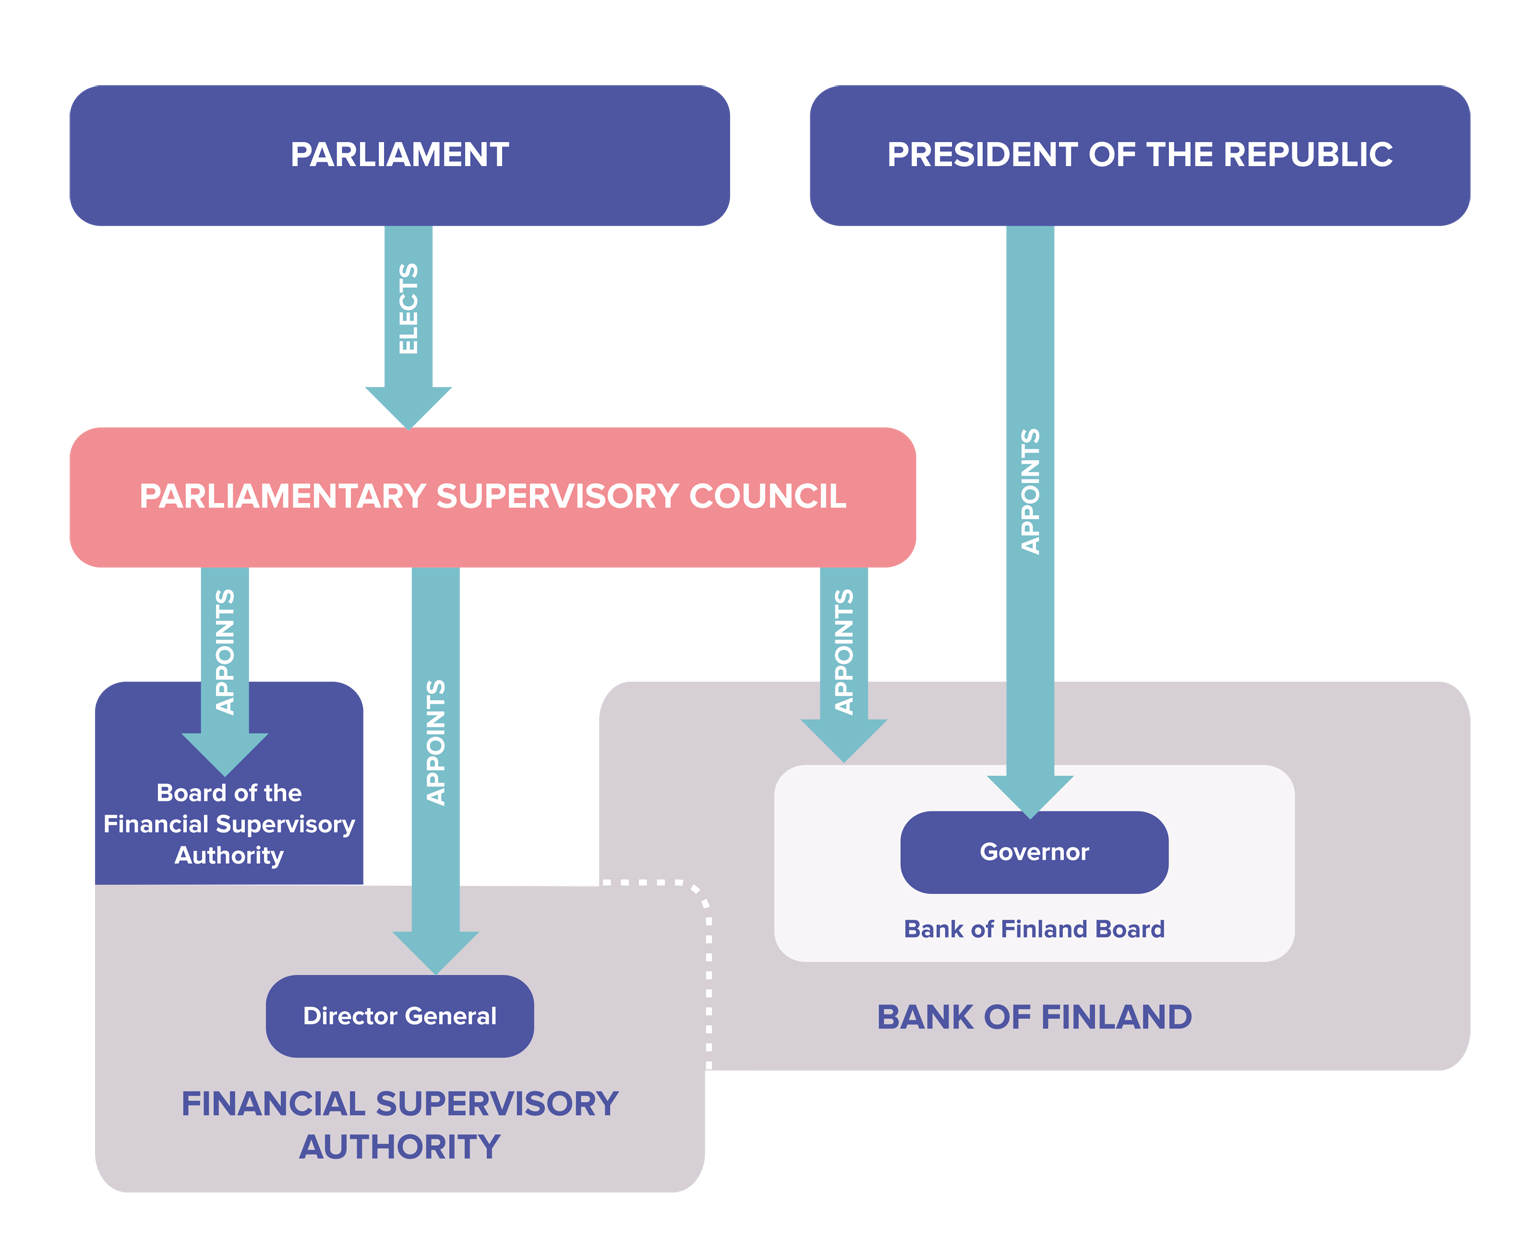 Bank of Finland’s status